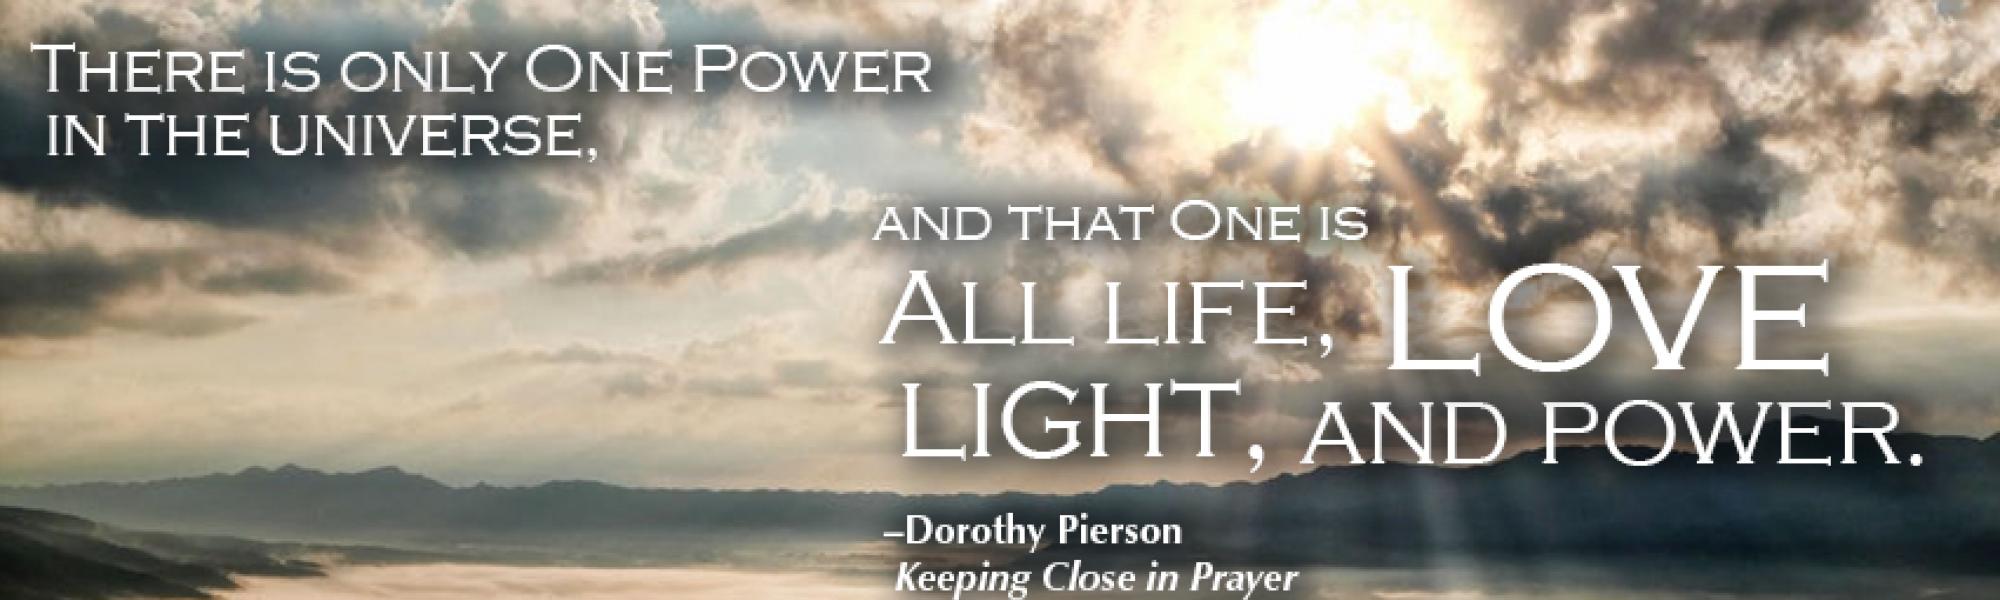 all life, love, light and power